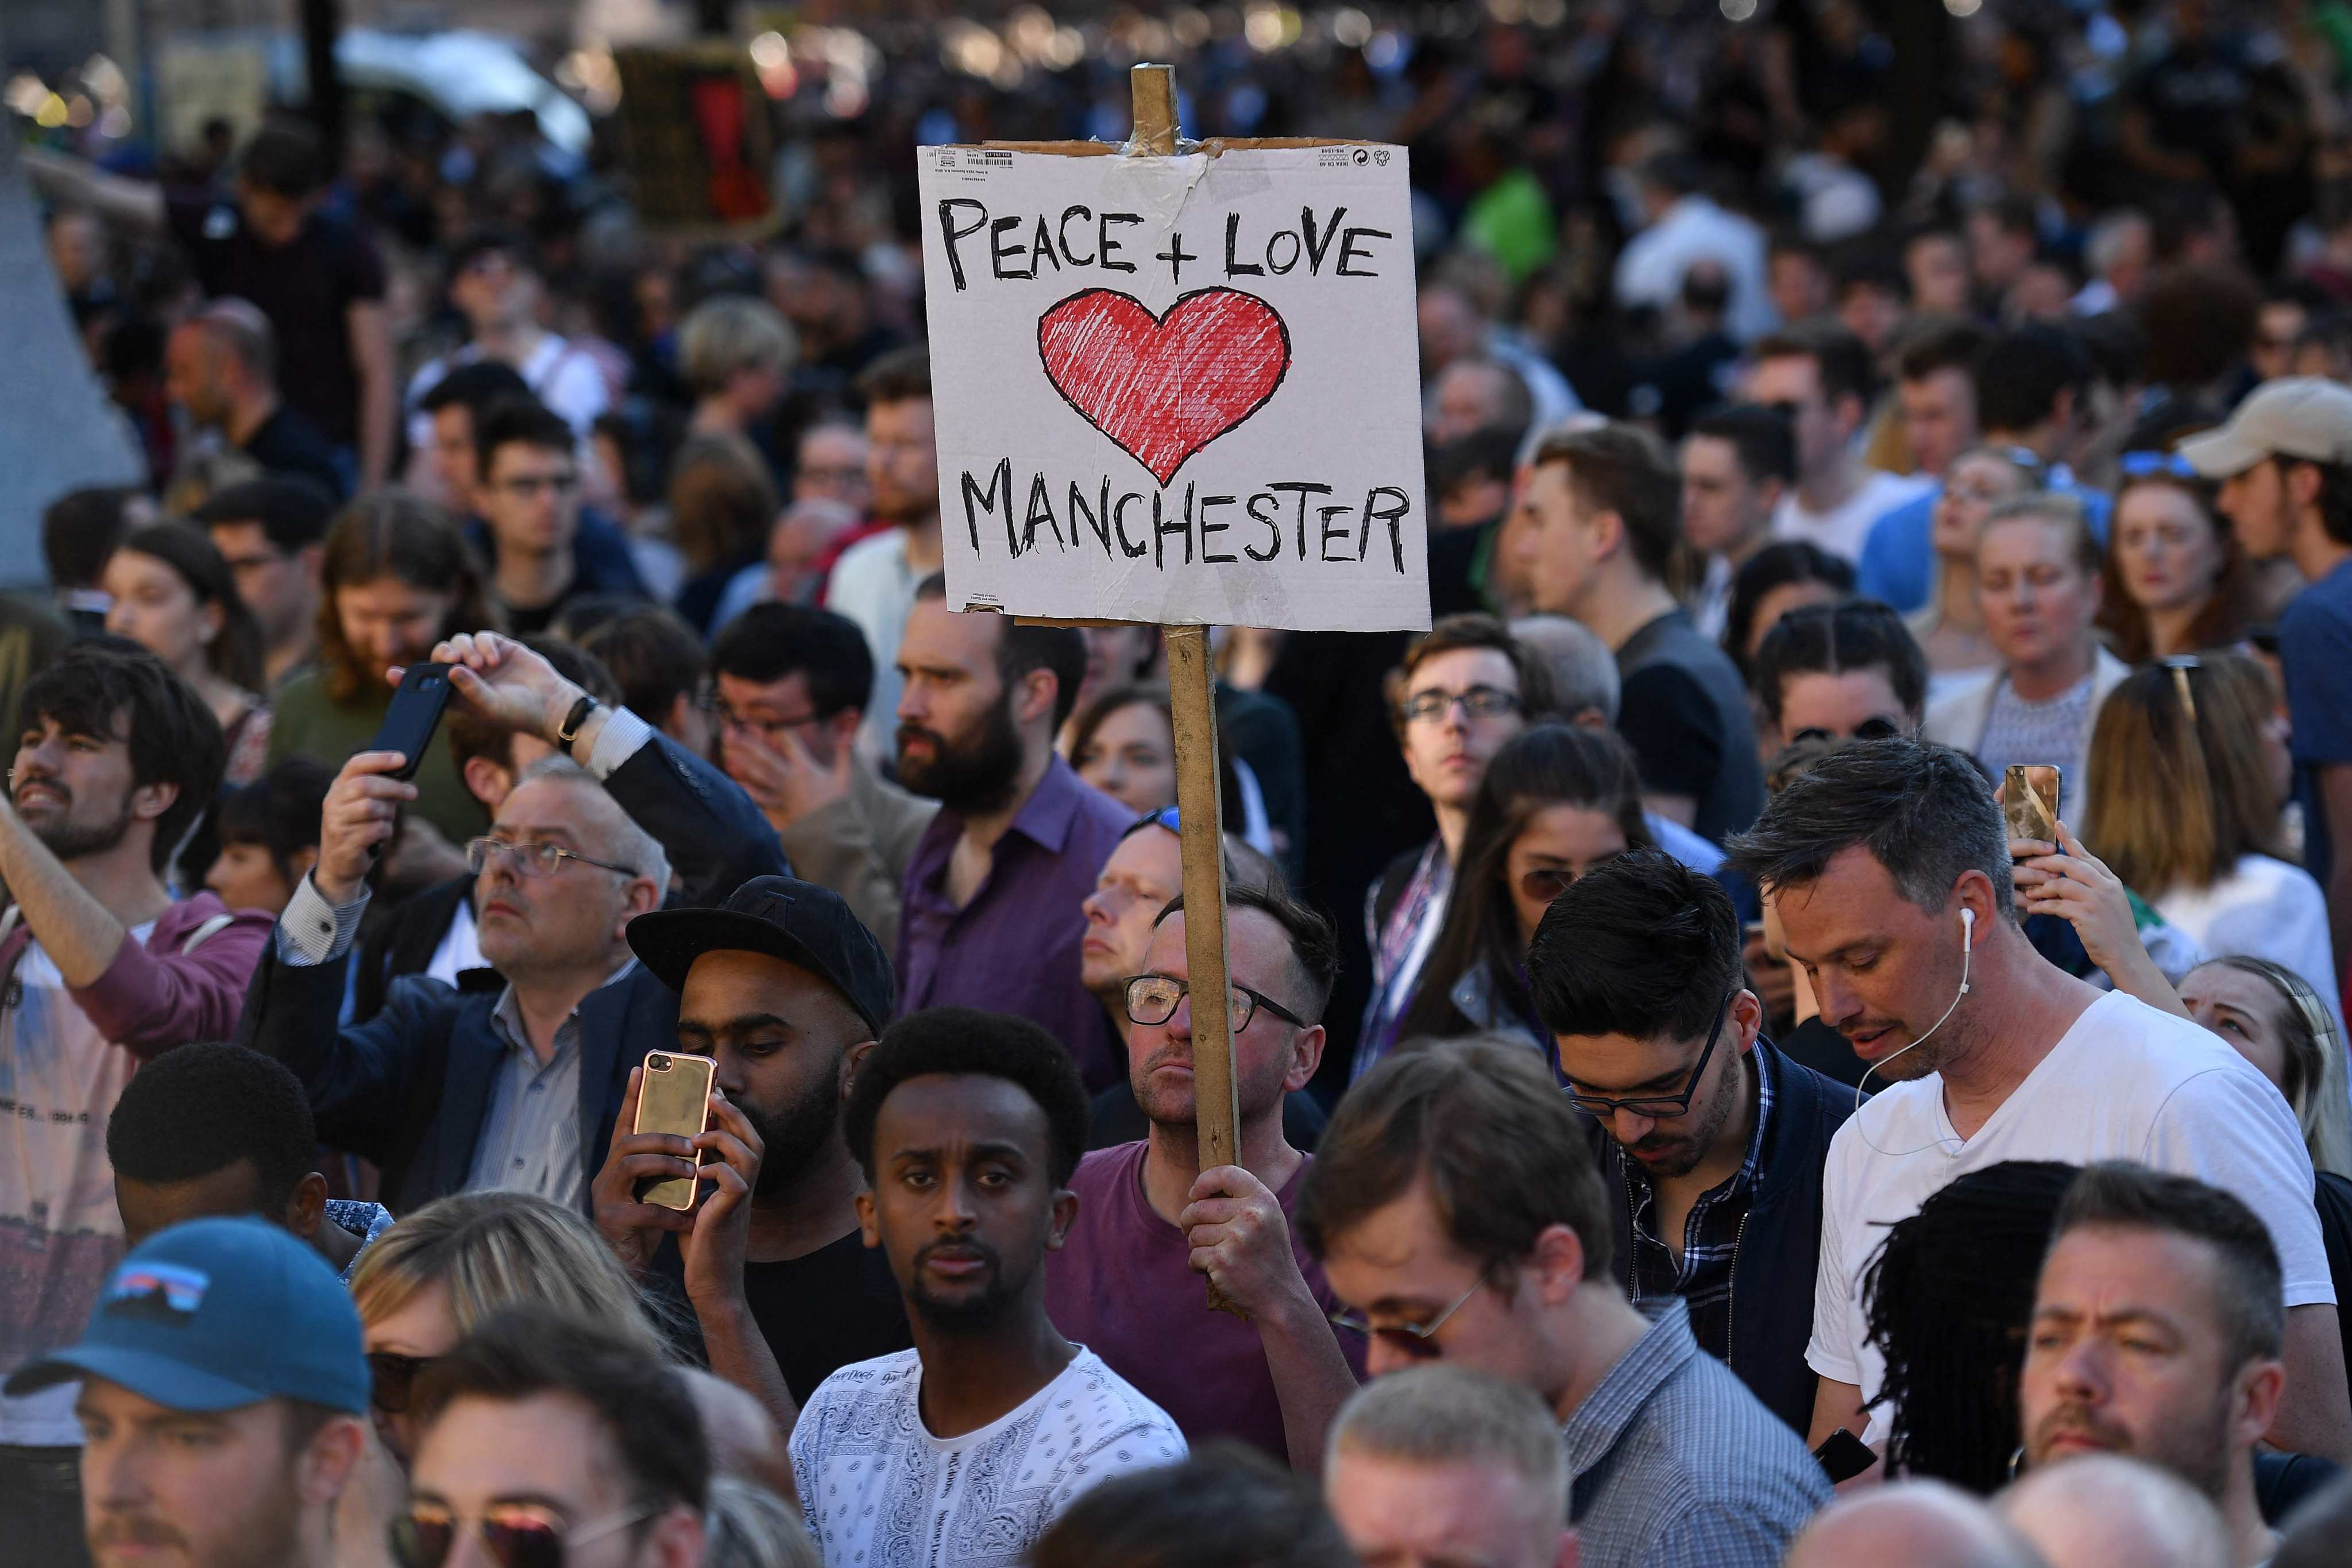 People attend a vigil in Albert Square in Manchester, England on May 23, 2017, in support of those killed and injured in the May 22 terror attack at the Ariana Grande concert at the Manchester Arena. Photo: AFP